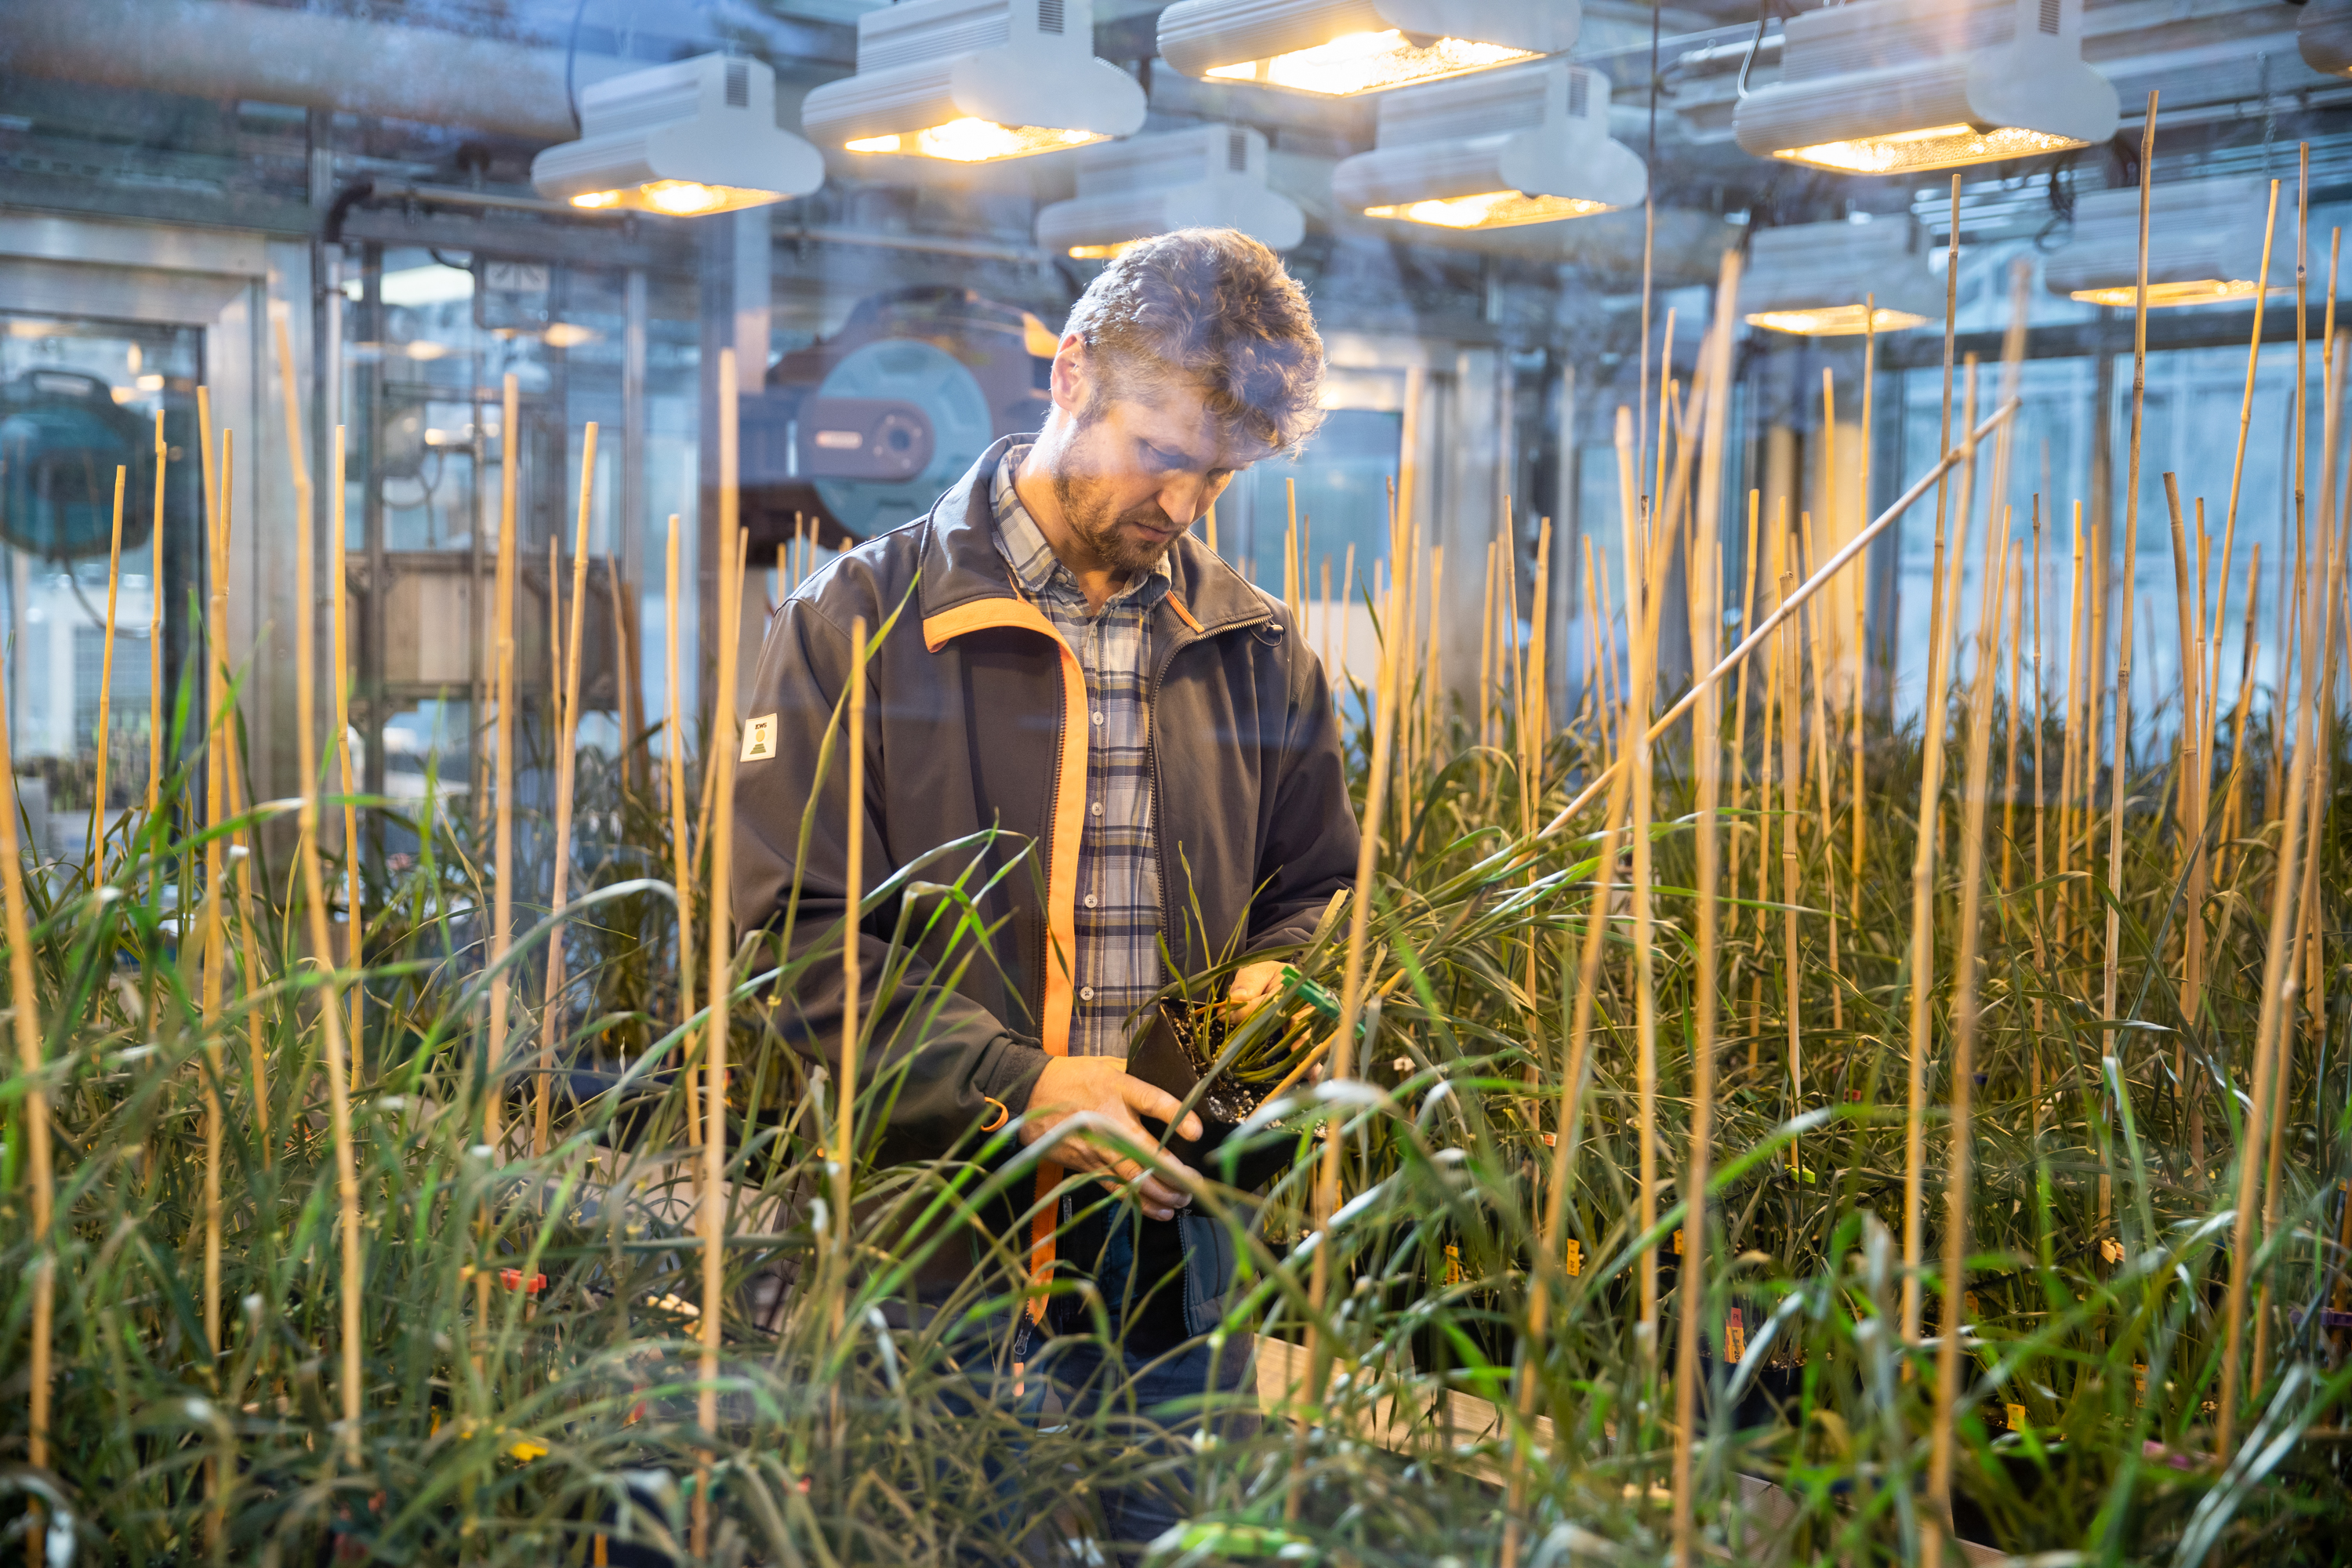 Pre-Breeder Klaus Oldach inspects the growth of the barley plants in the greenhouse.  